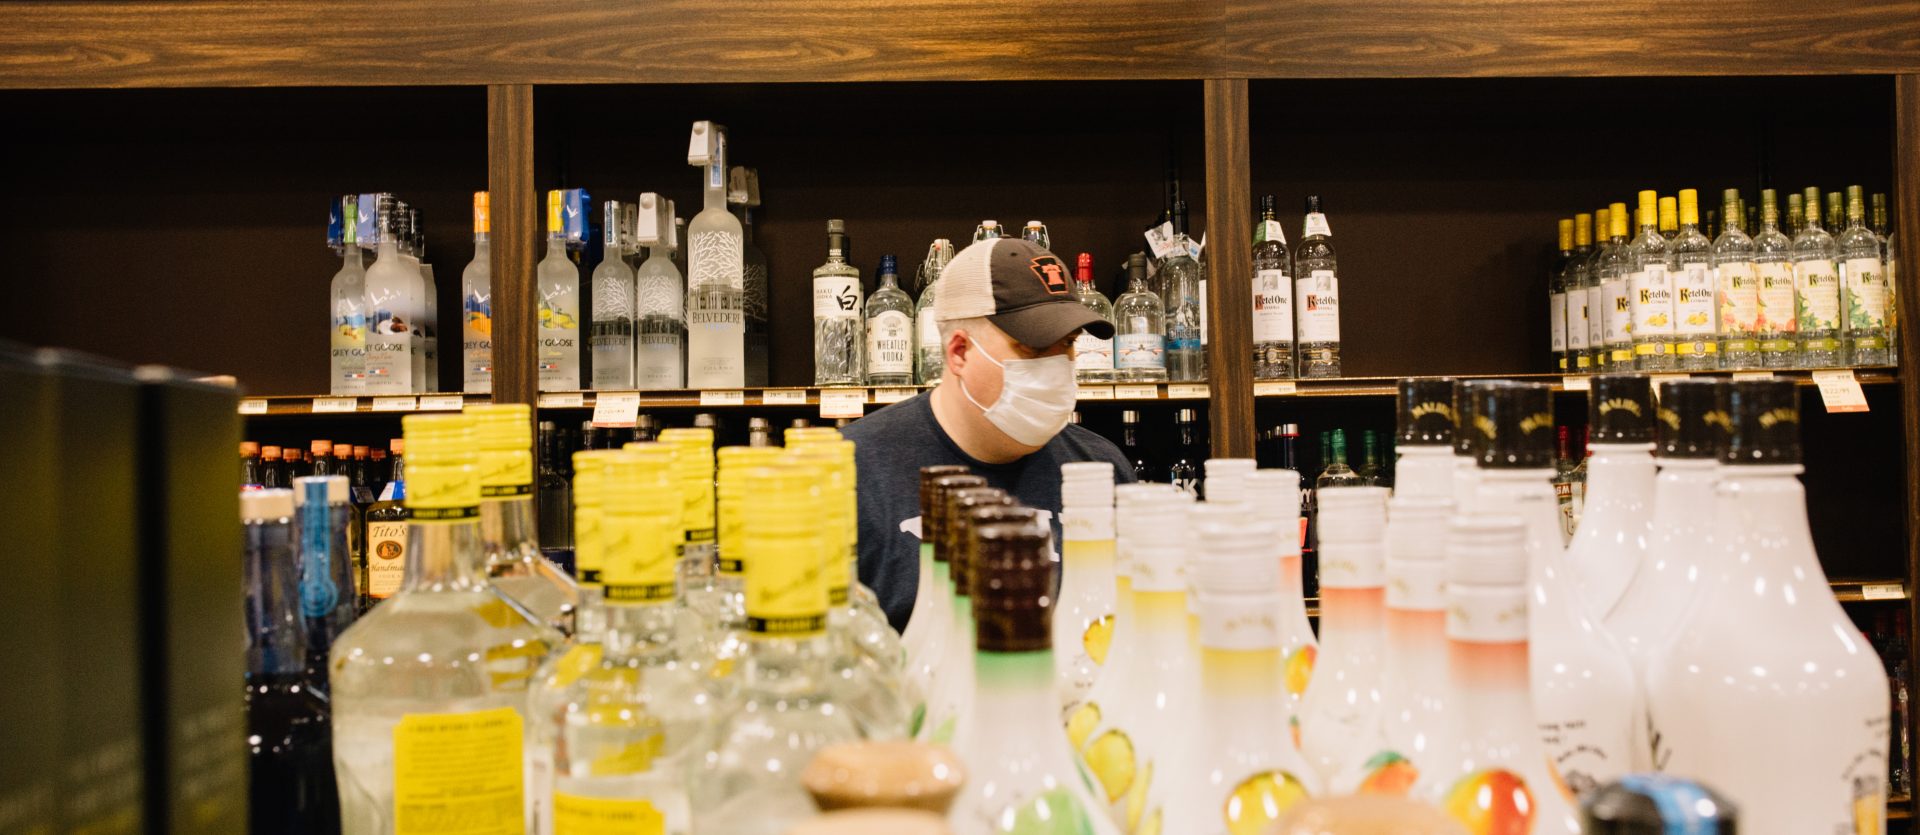 A customer wears a mask while shopping at a Fine Wine and Good Spirits store in Cumberland County on May 22, 2020, the first day the store reopened to shoppers after having been closed due to the coroanvirus.